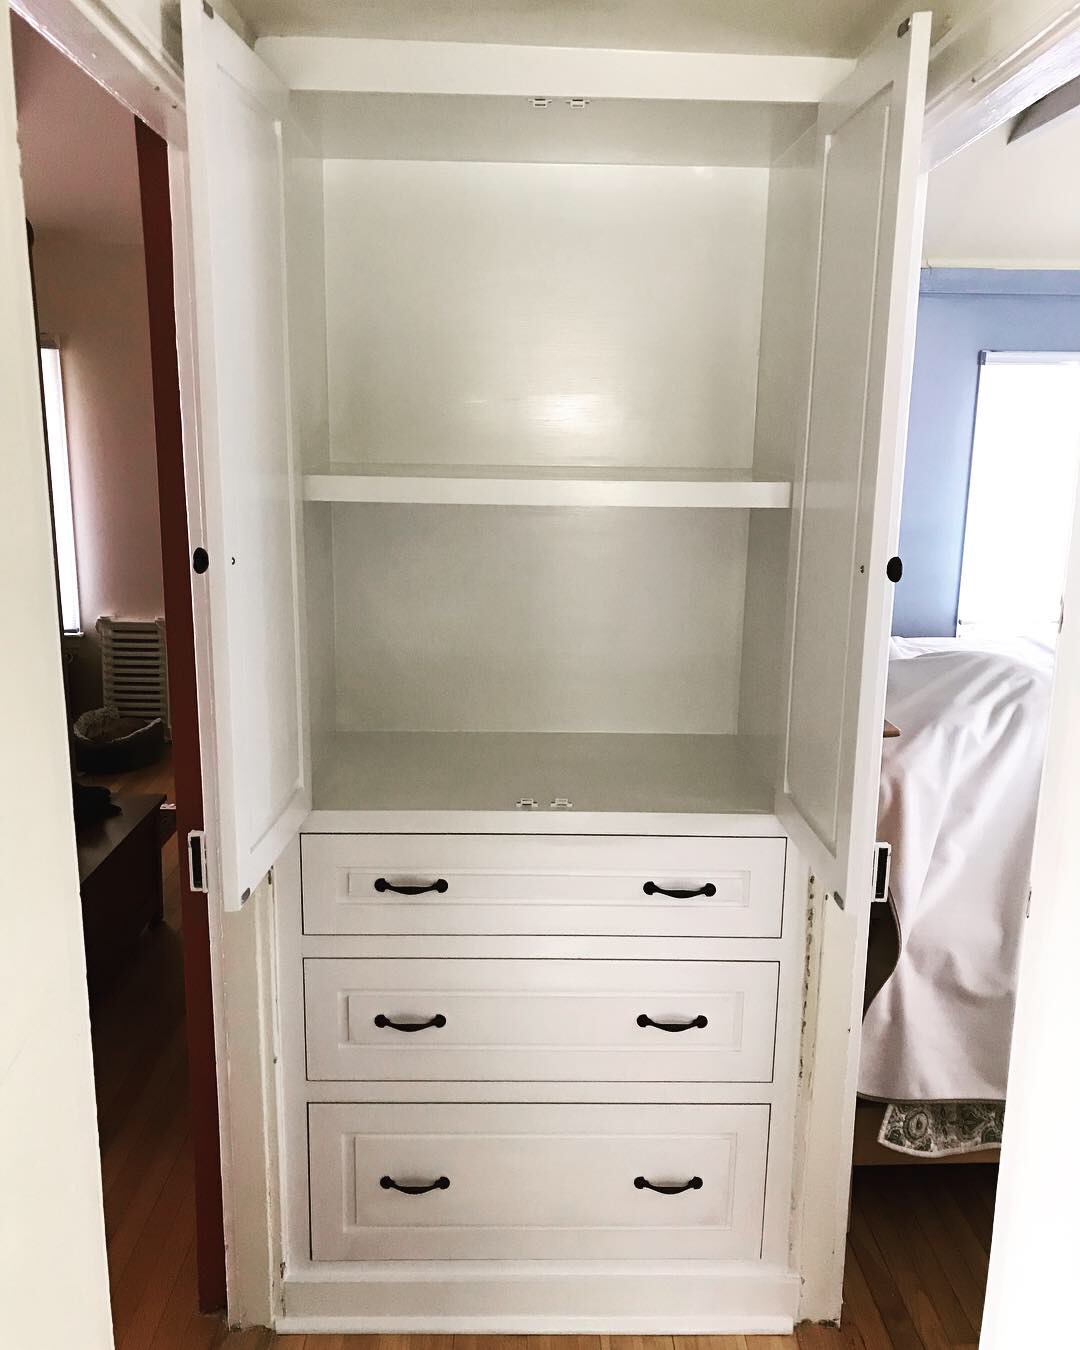  Inside the upper area is ample storage, and on top of each adjacent doorway is a small silicone bumper to keep the linen closet doors and the door trim from damaging each other when the doors are opened.  